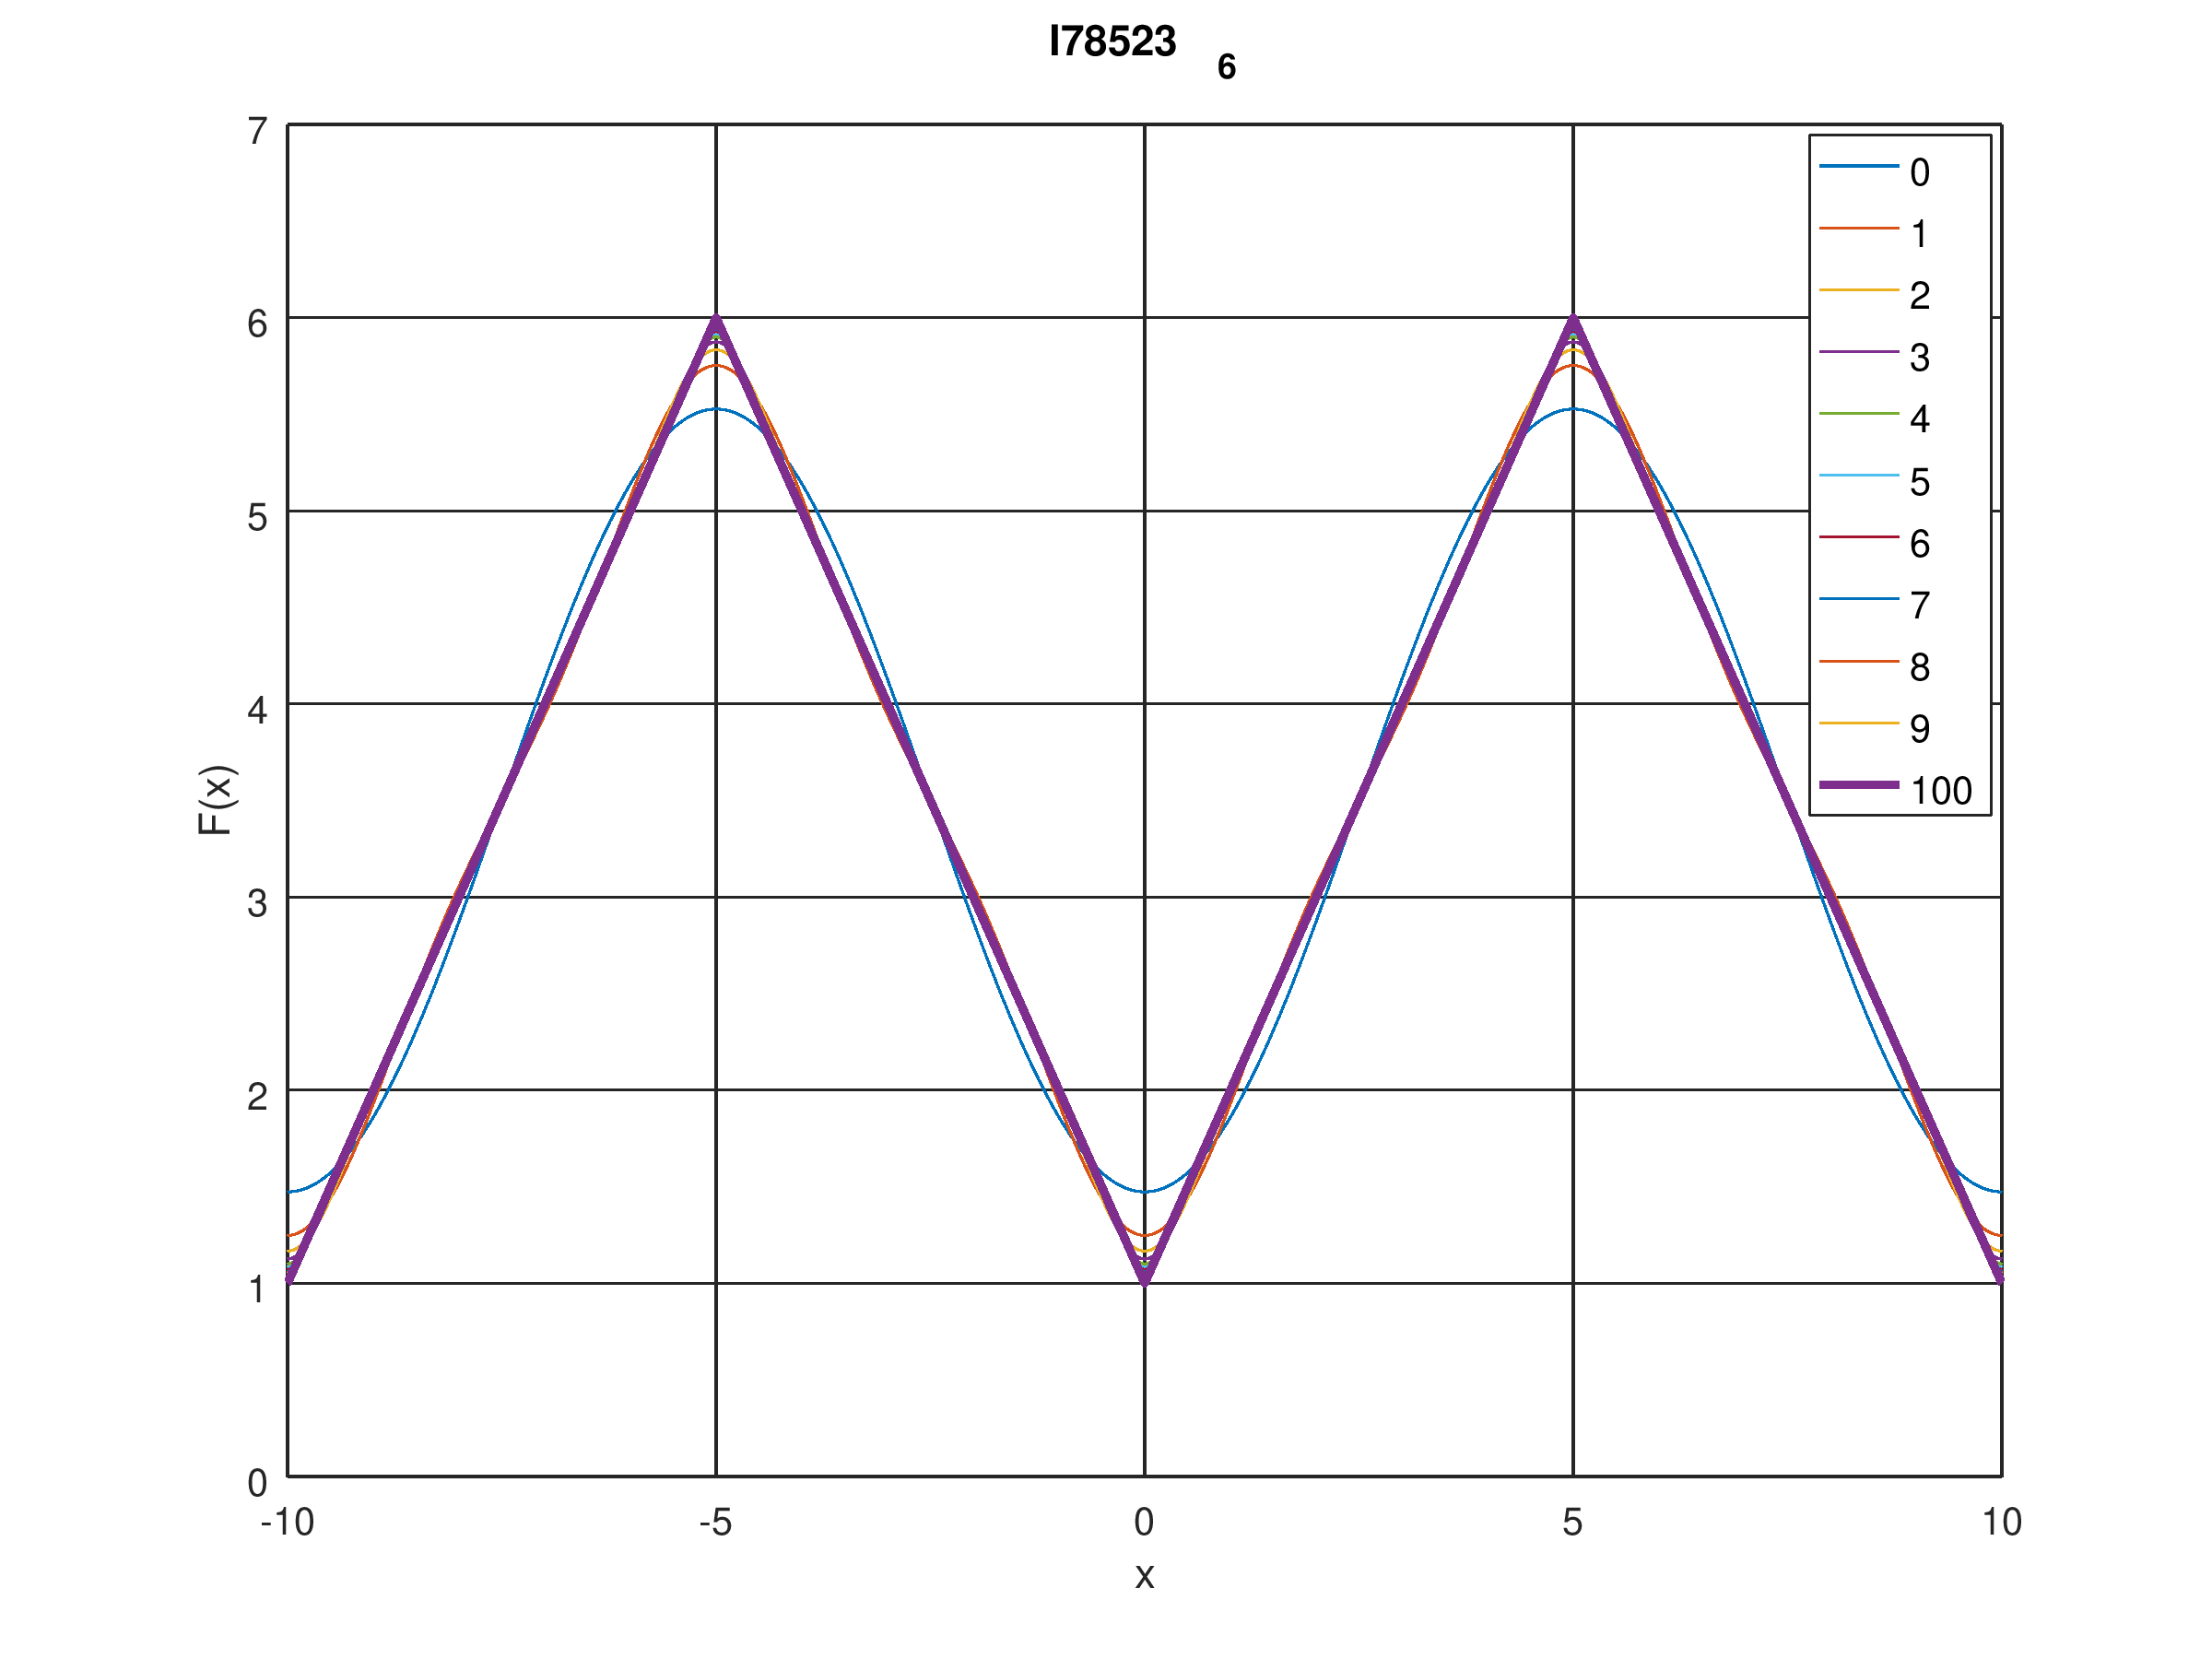 Illustration of the Fourier series